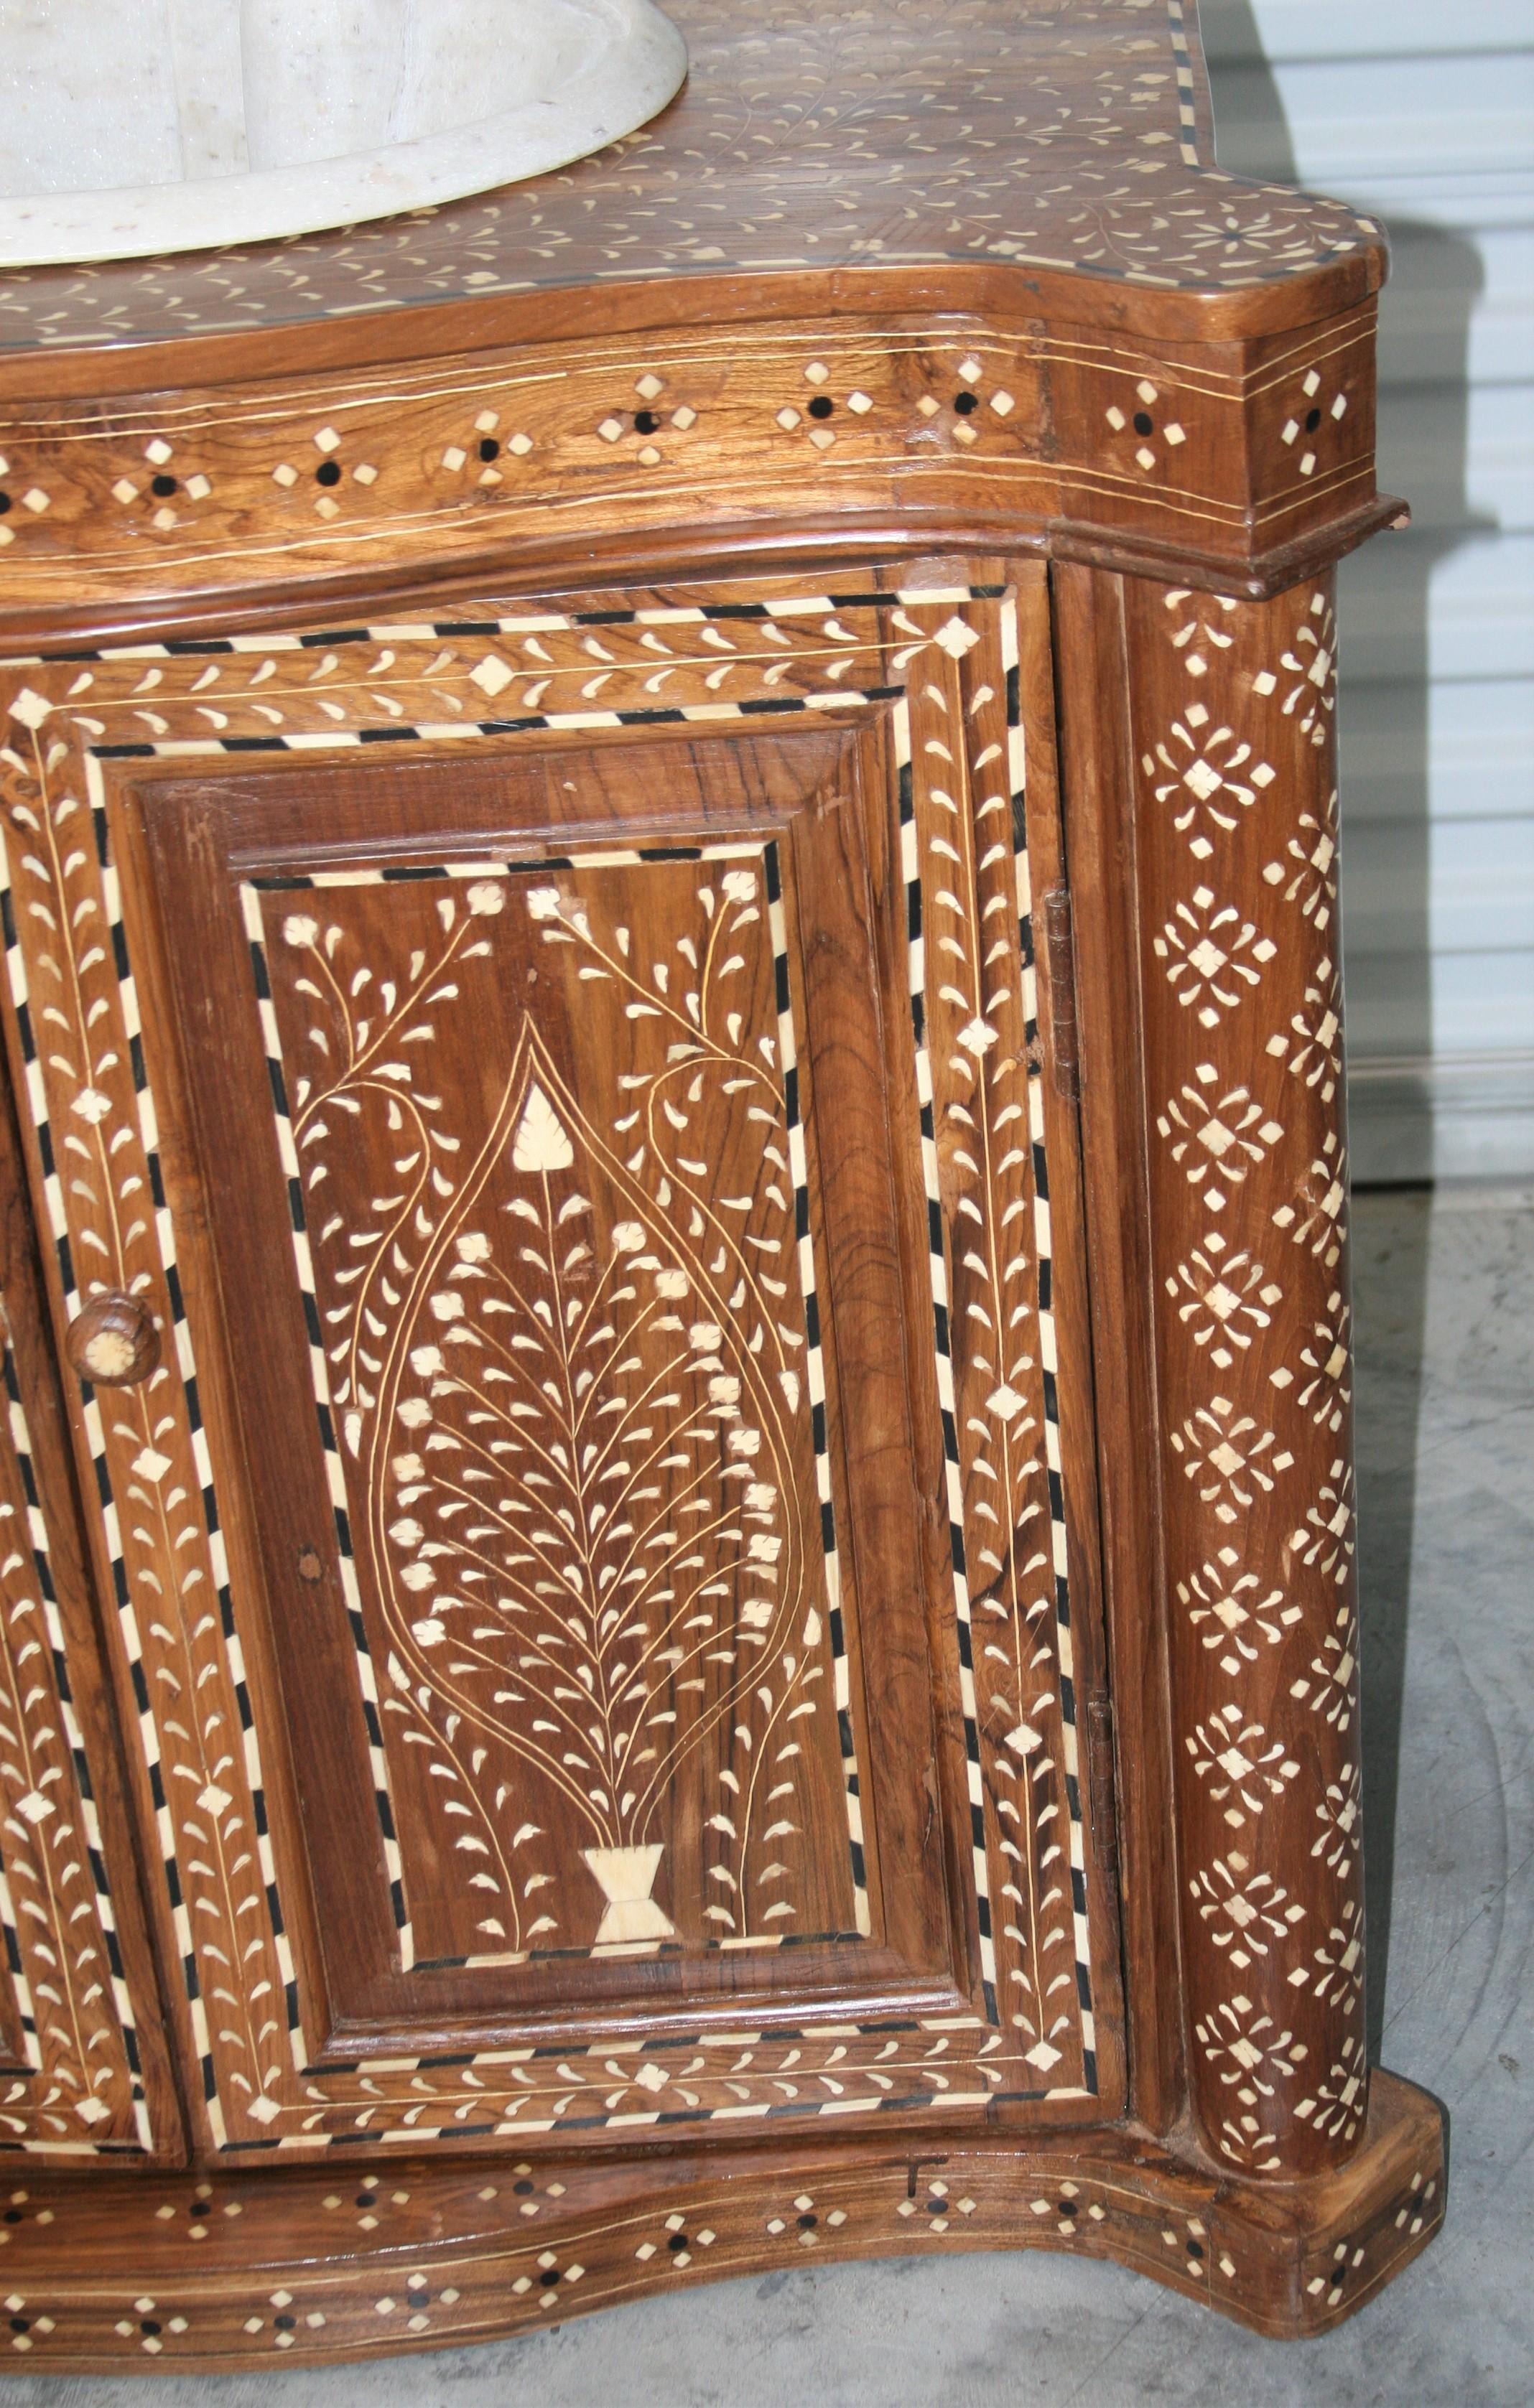 Indian Fine Marble Sink on Solid Teak Wood Vanity Exquisitely Hand Inlaid with Bone For Sale